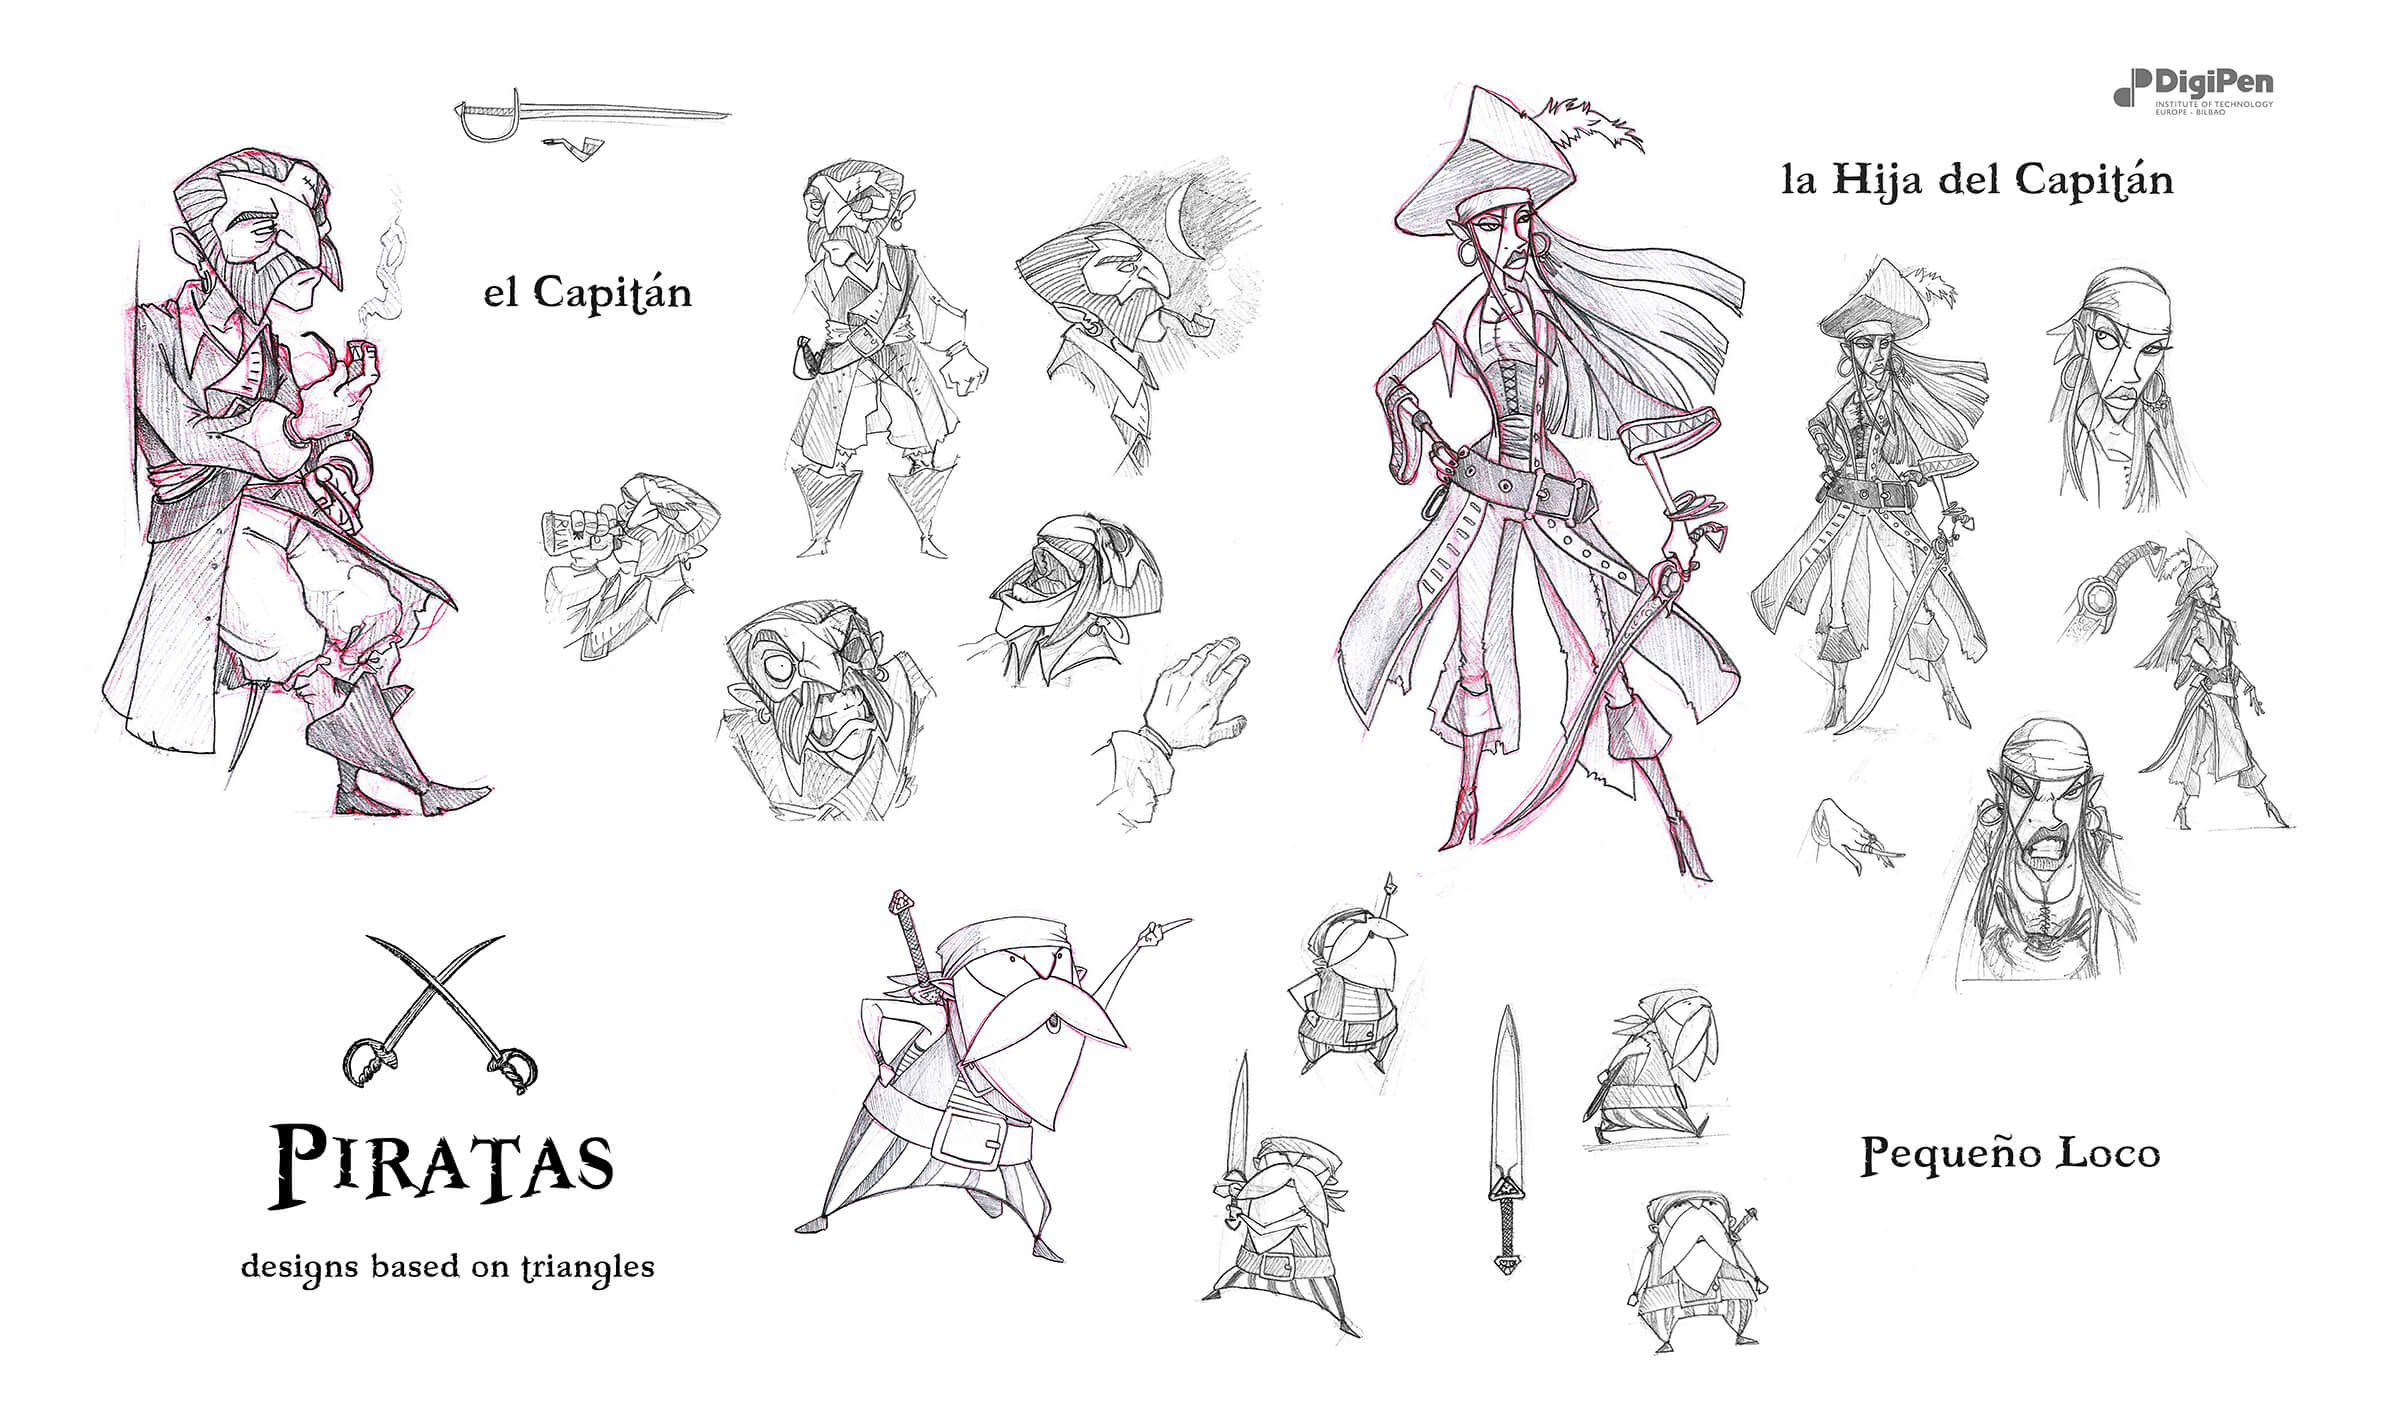 Black-and-white sketches of a pirate captain, his sword-wielding daughter, and an old, short pirate.